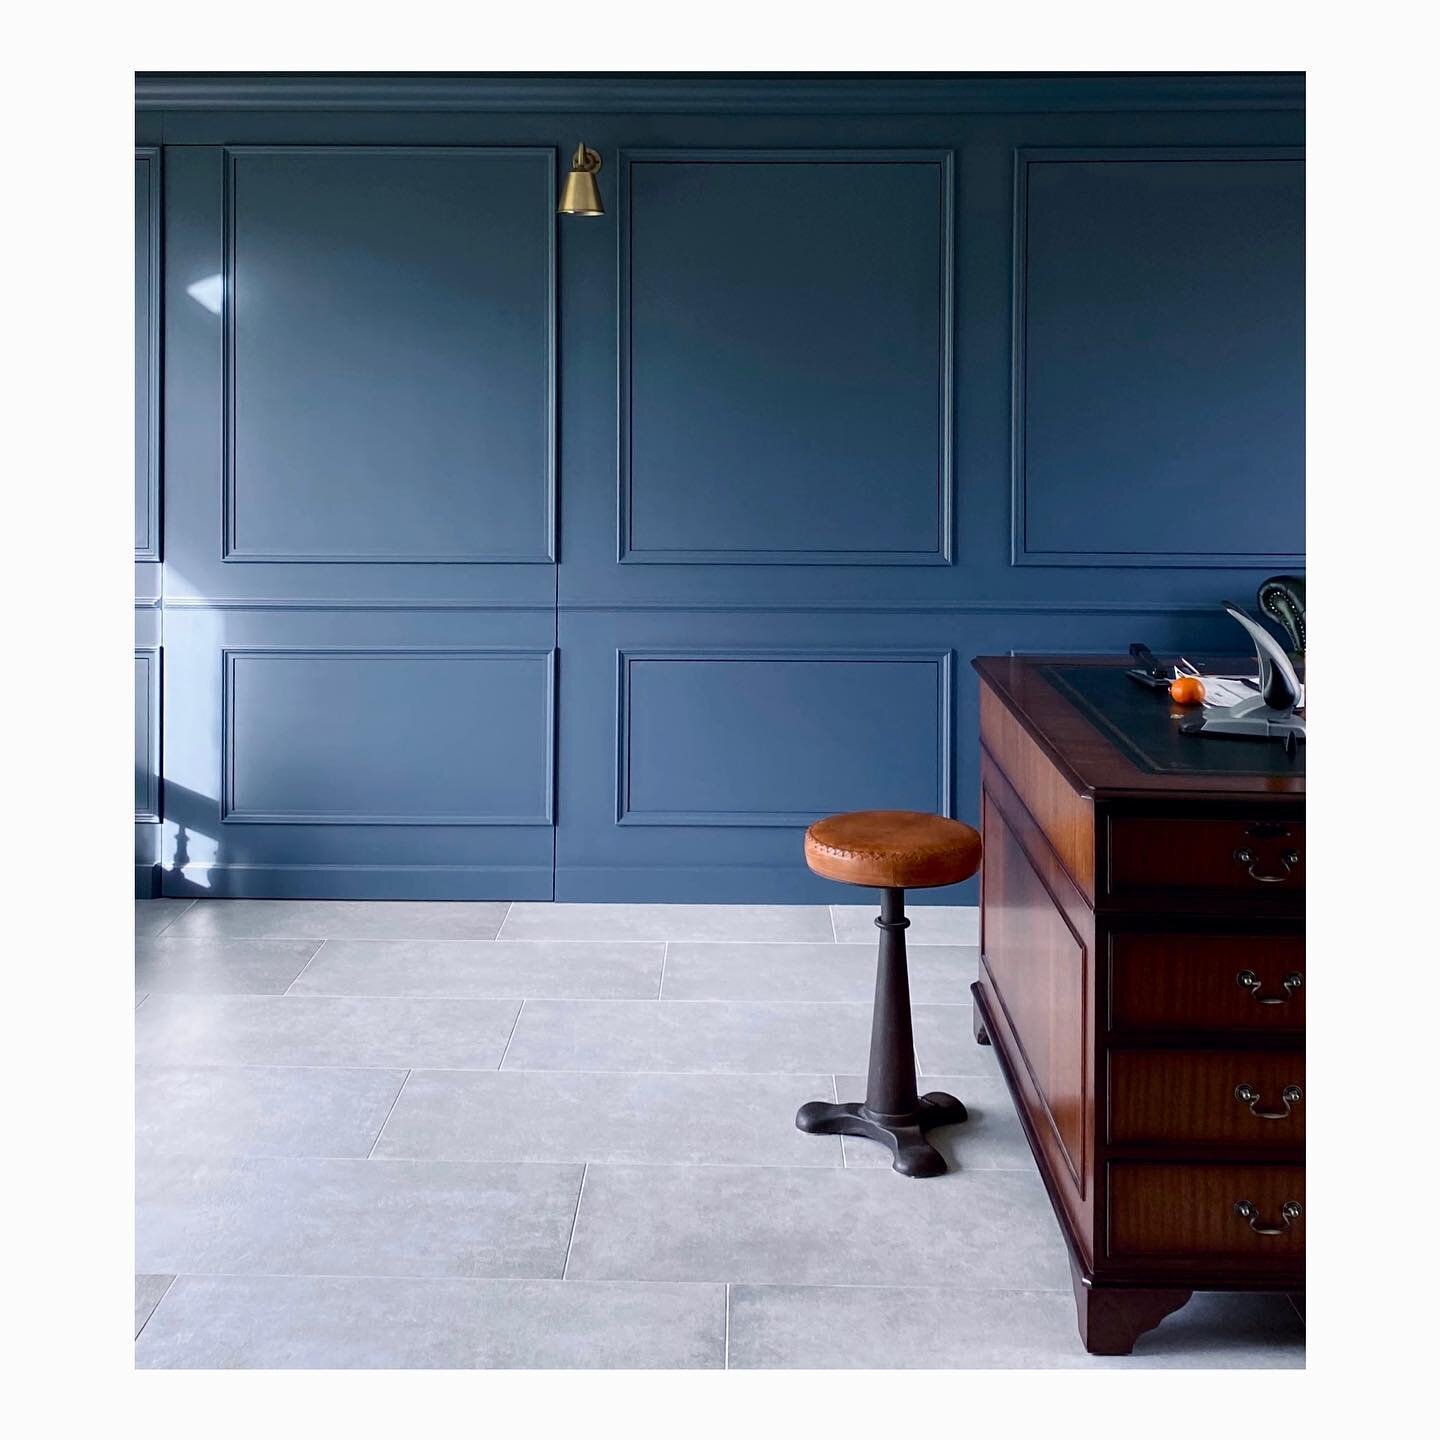 A pic of the lovely bespoke panelled wall with hidden door we enjoyed creating over at the Old Watermill project..
.
.
.
.
#bespokestudy #bespokepanelling #countryliving #countryinteriors #interdesigner #cotswoldsinteriors #cotswoldliving